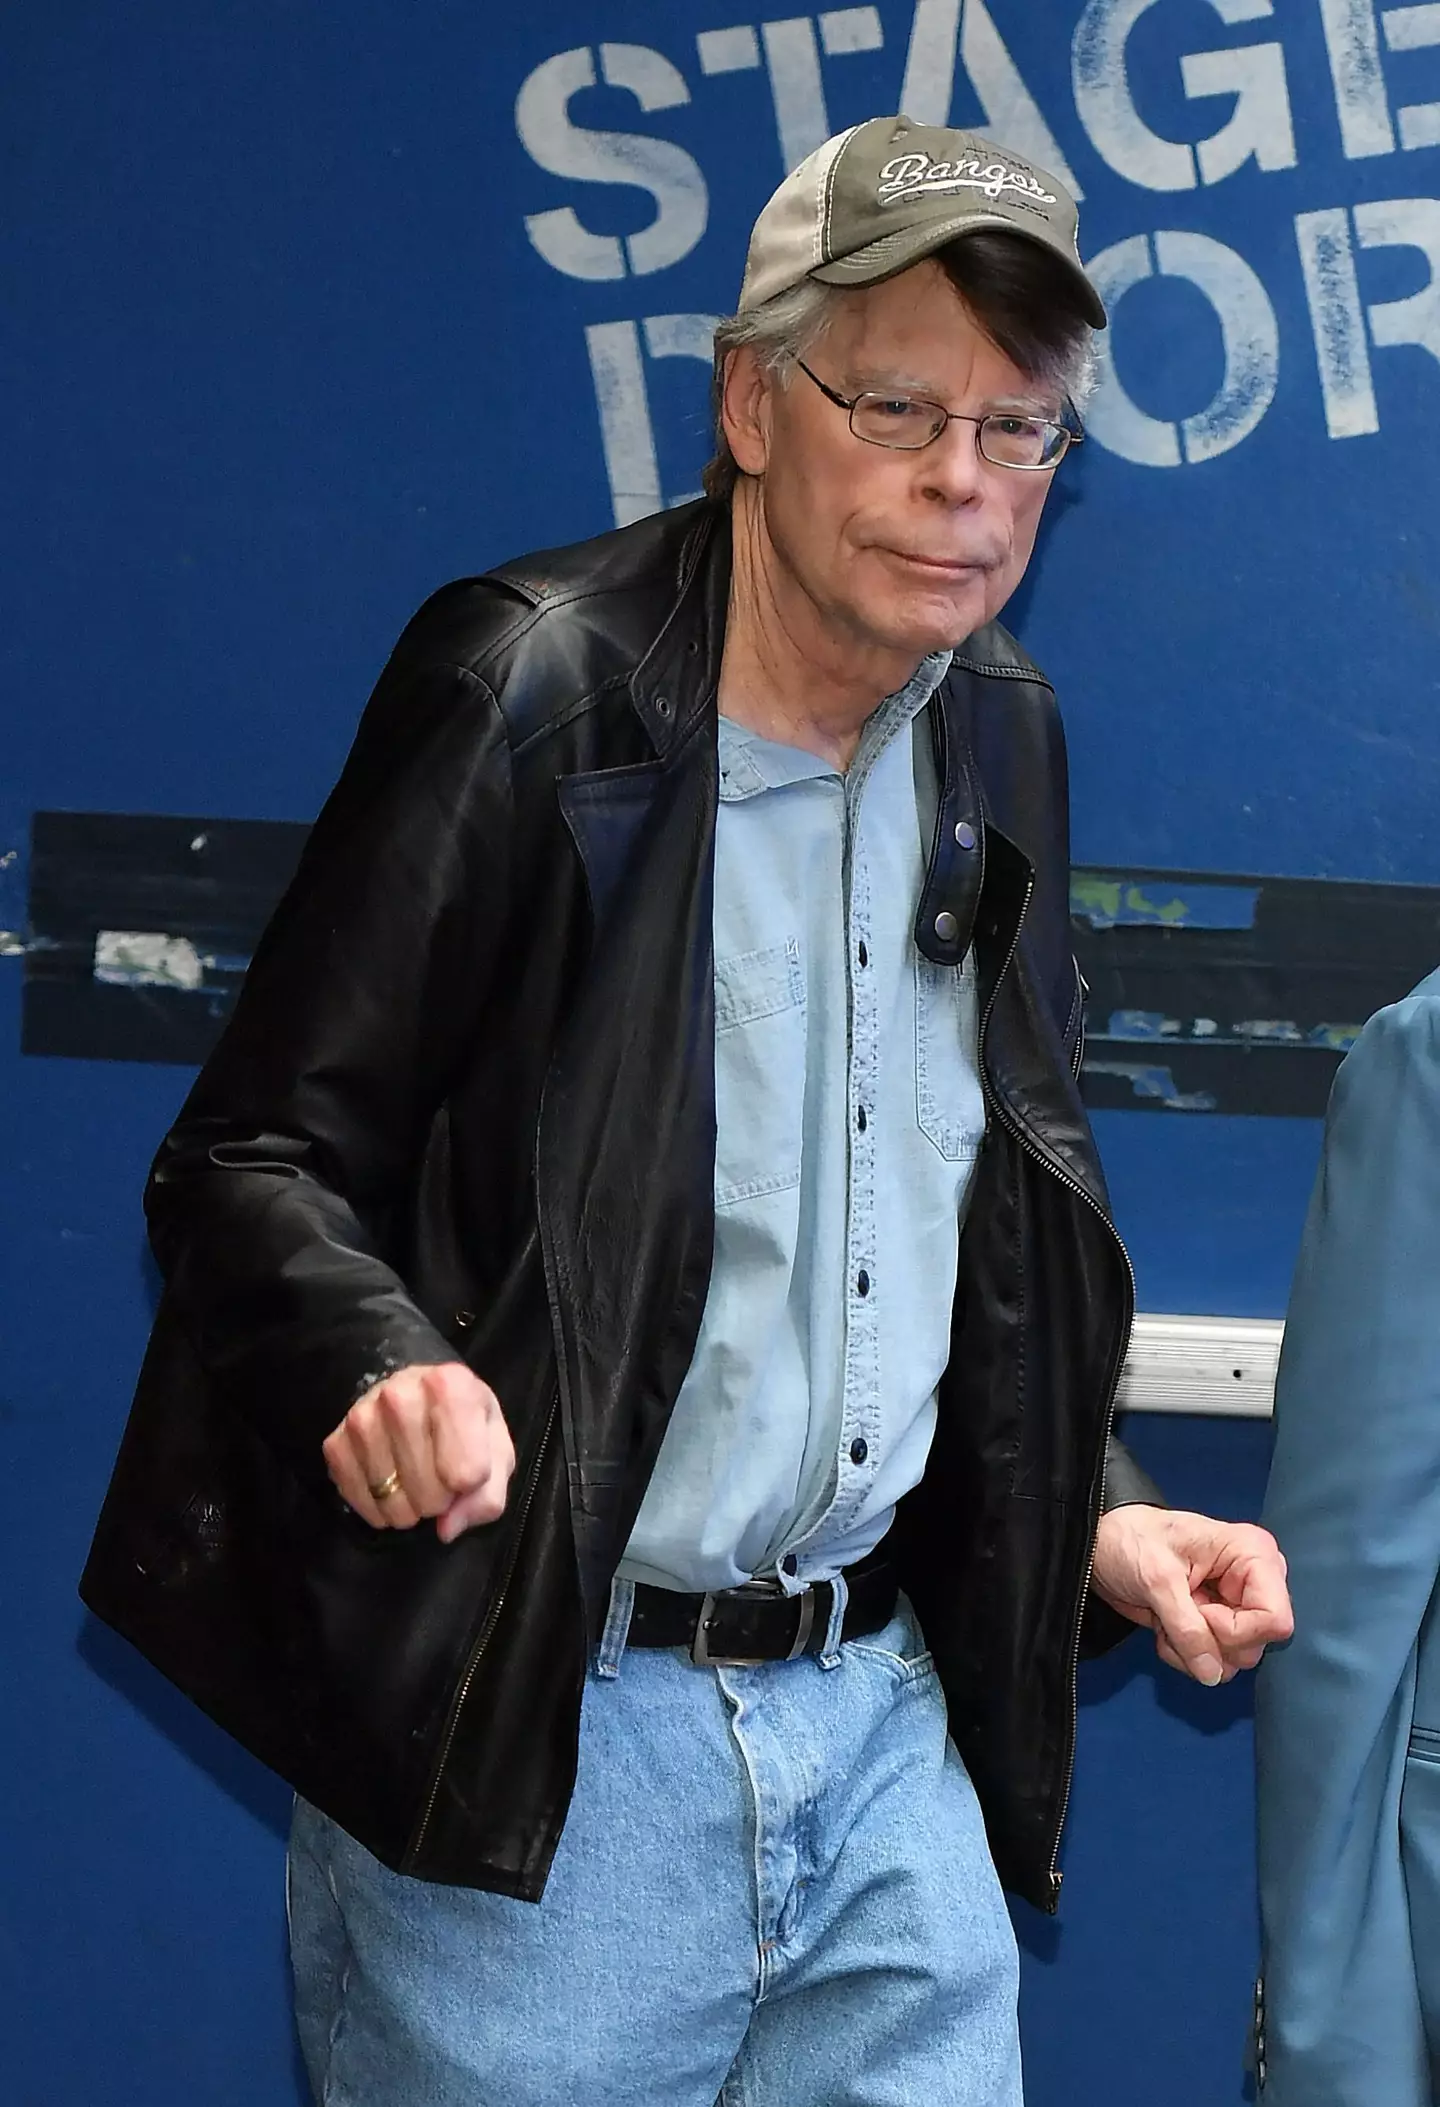 Stephen King has revealed the one movie he's walked out of.